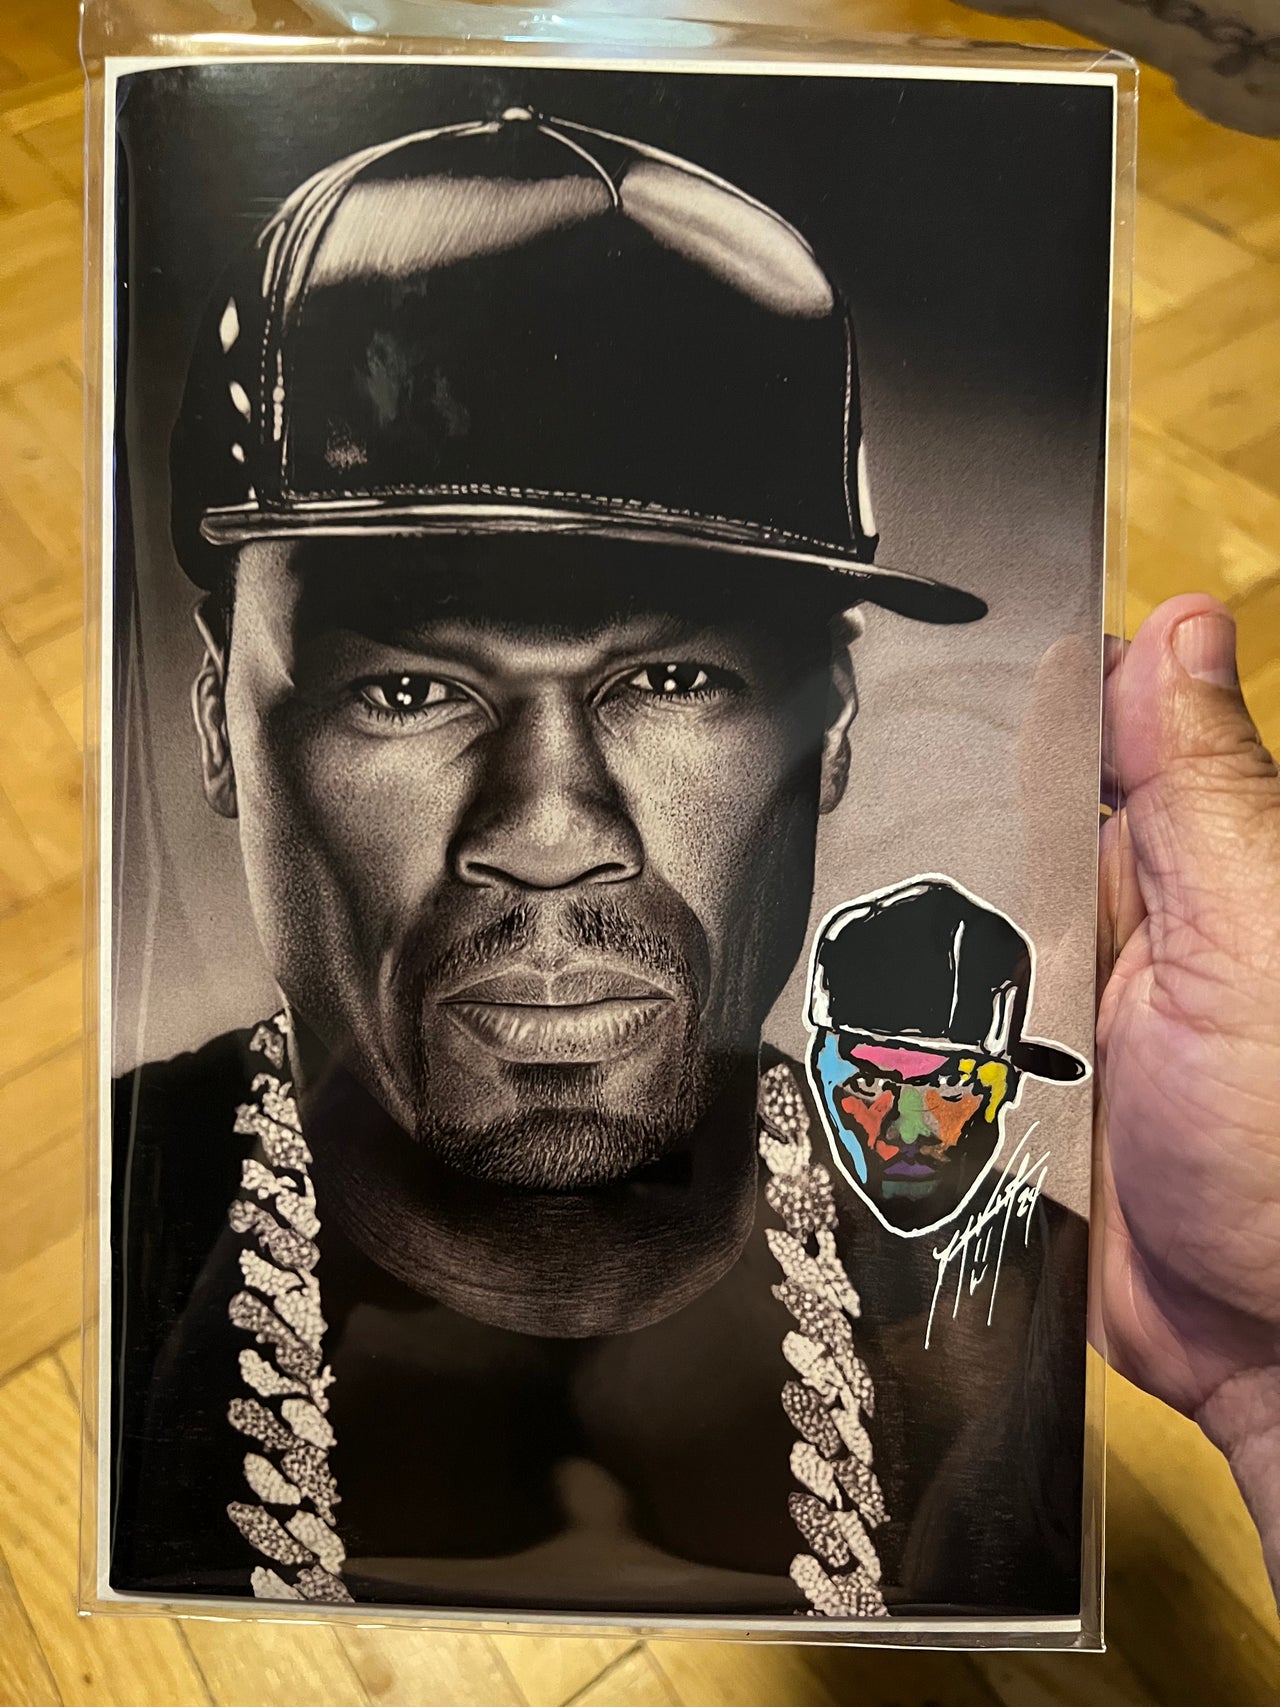 50 CENT FAME C2E2 VIRGIN SIGNED & REMARKED WITH FULL COLOR 50 CENT